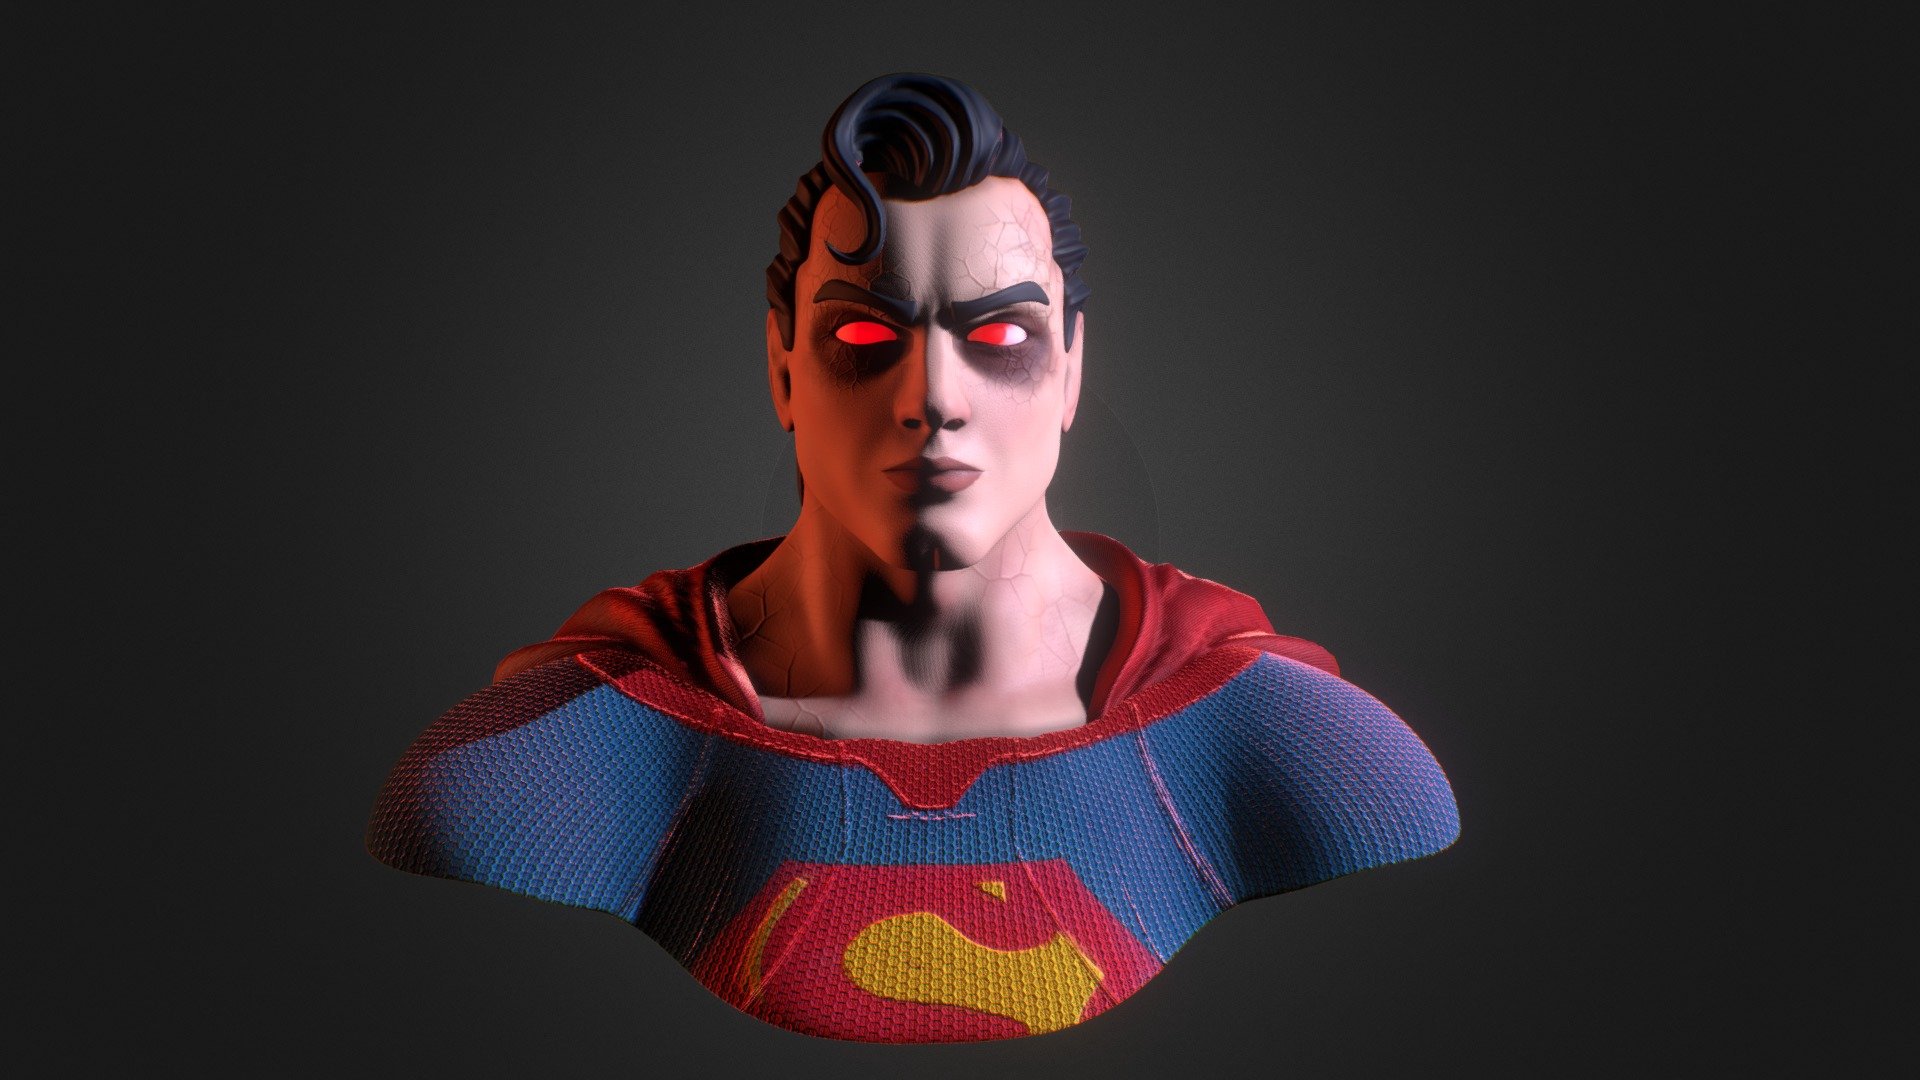 Corrupted Superman sculpt made in zbrush, textured in substance painter and rendered in Blender 3d model